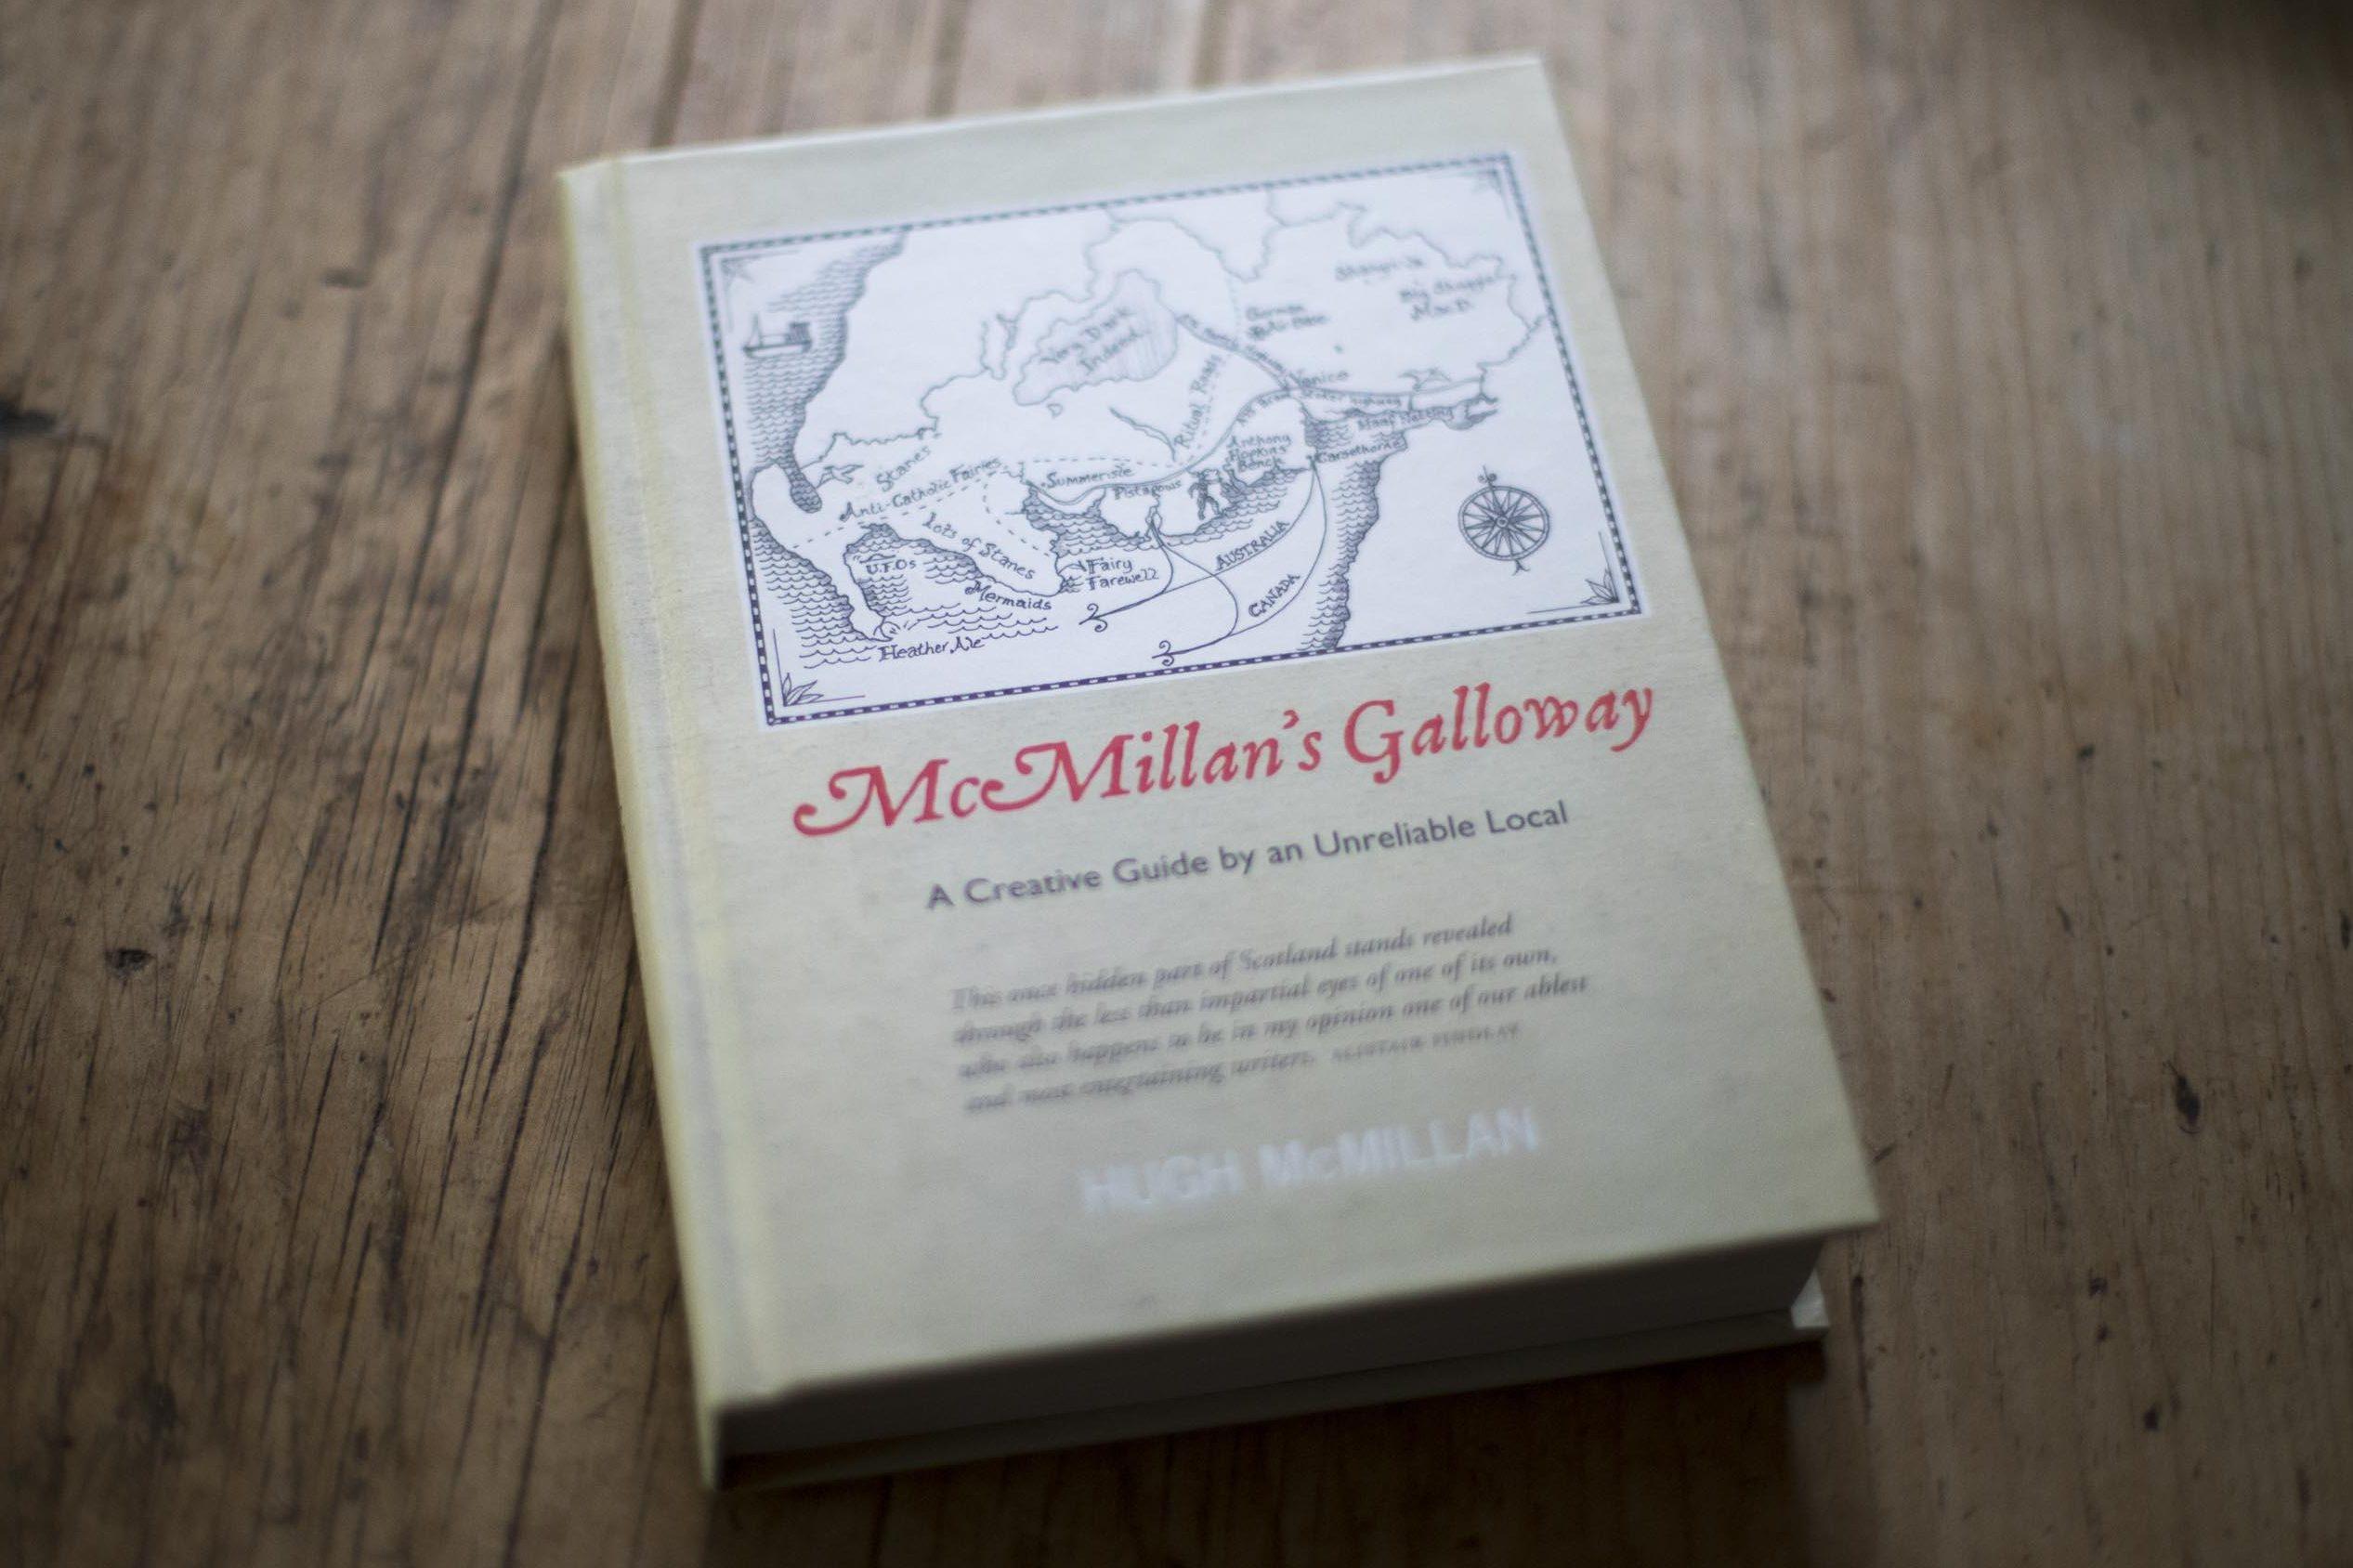 Hugh McMillan's book 'Mcmillan's Galloway sits on a wooden surface.